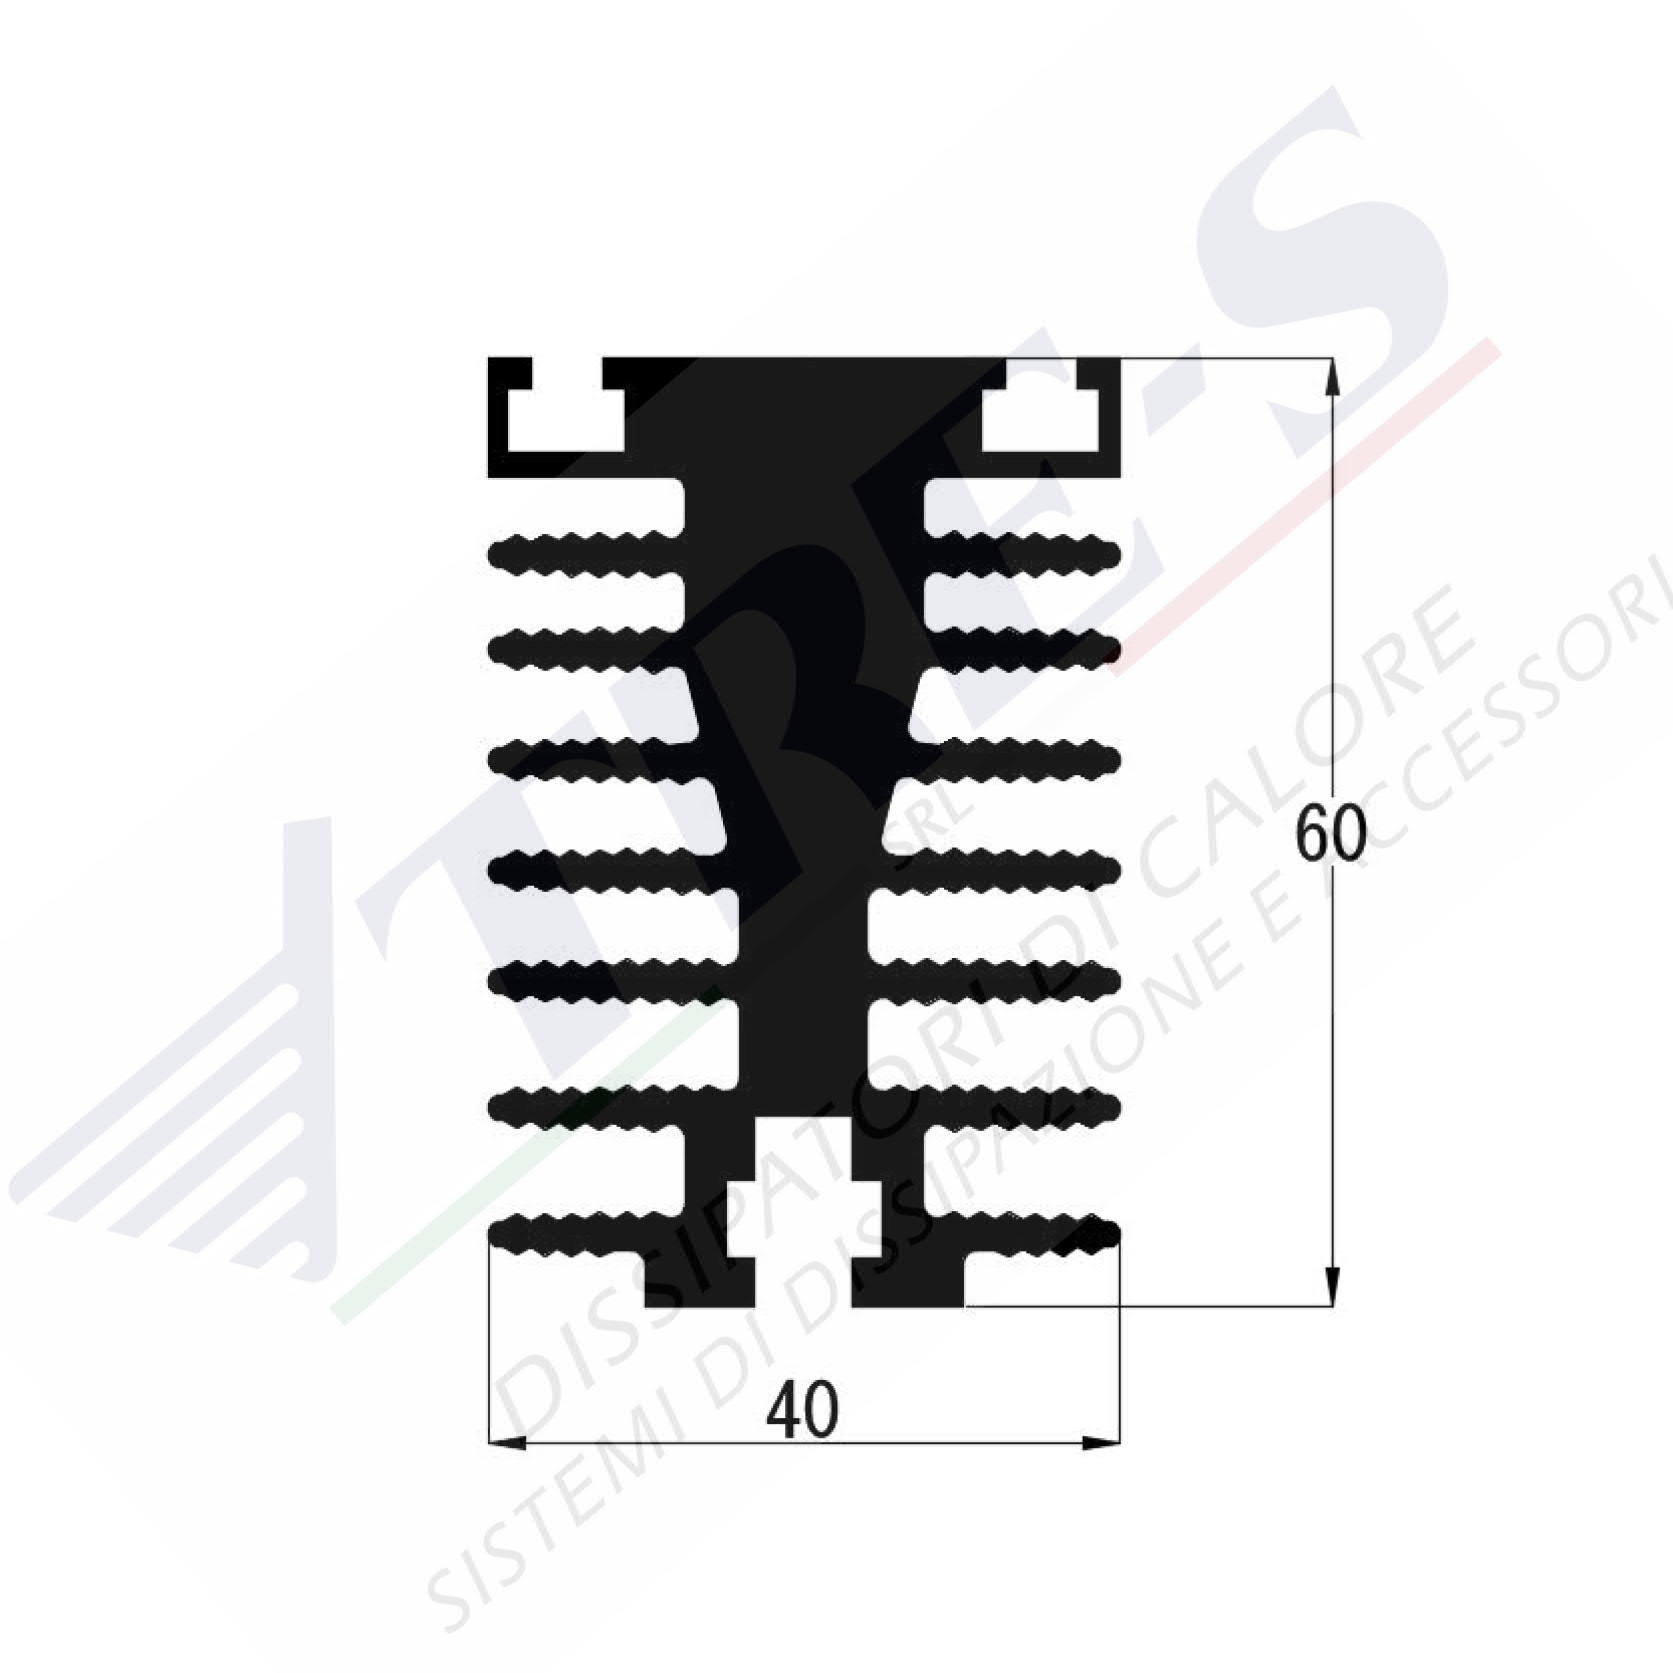 PRO1061 - Profiles for devices with screw connections